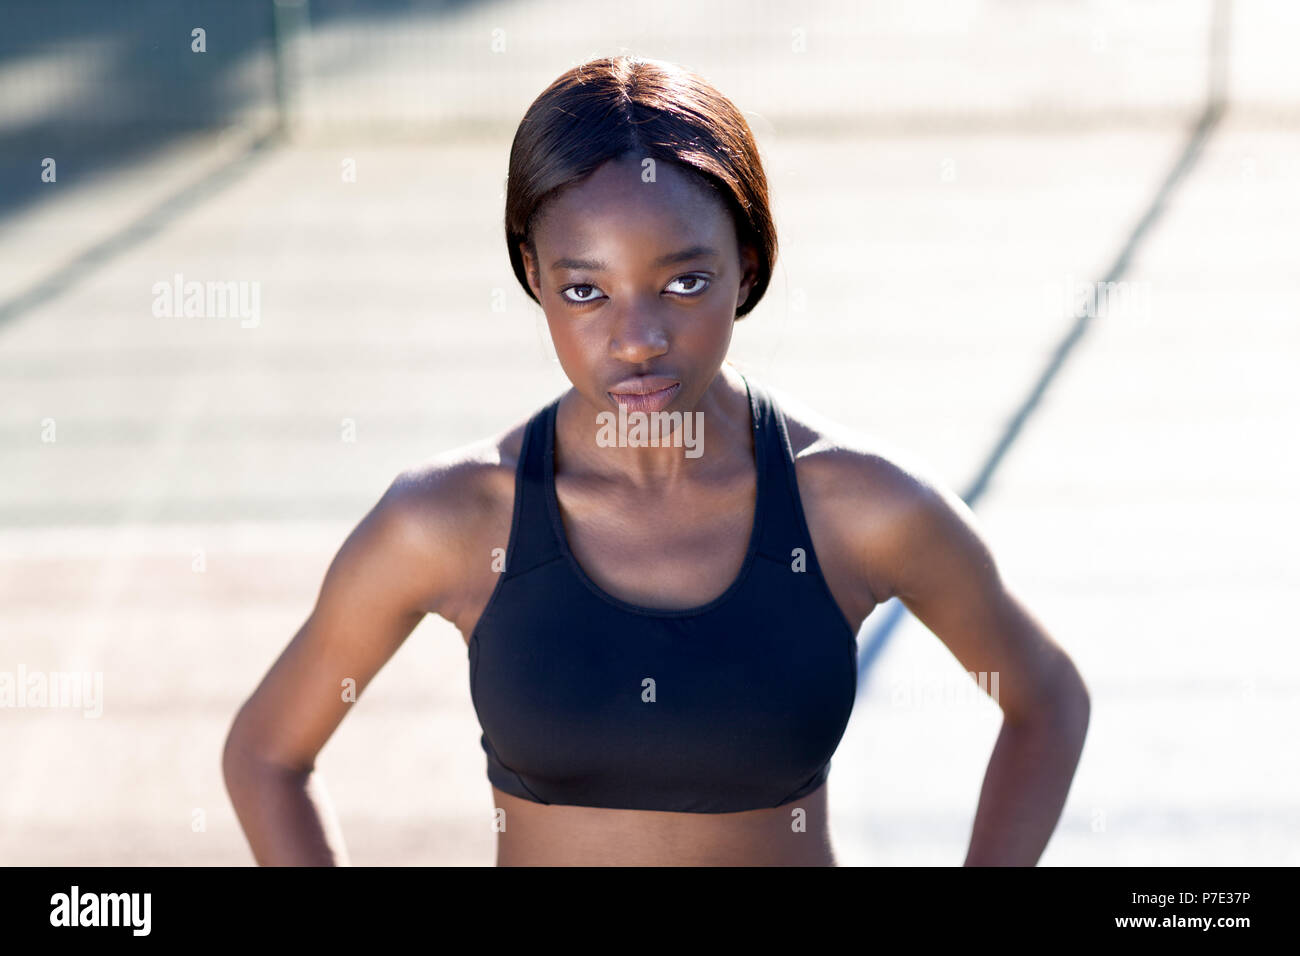 Young woman in sports bra Stock Photo